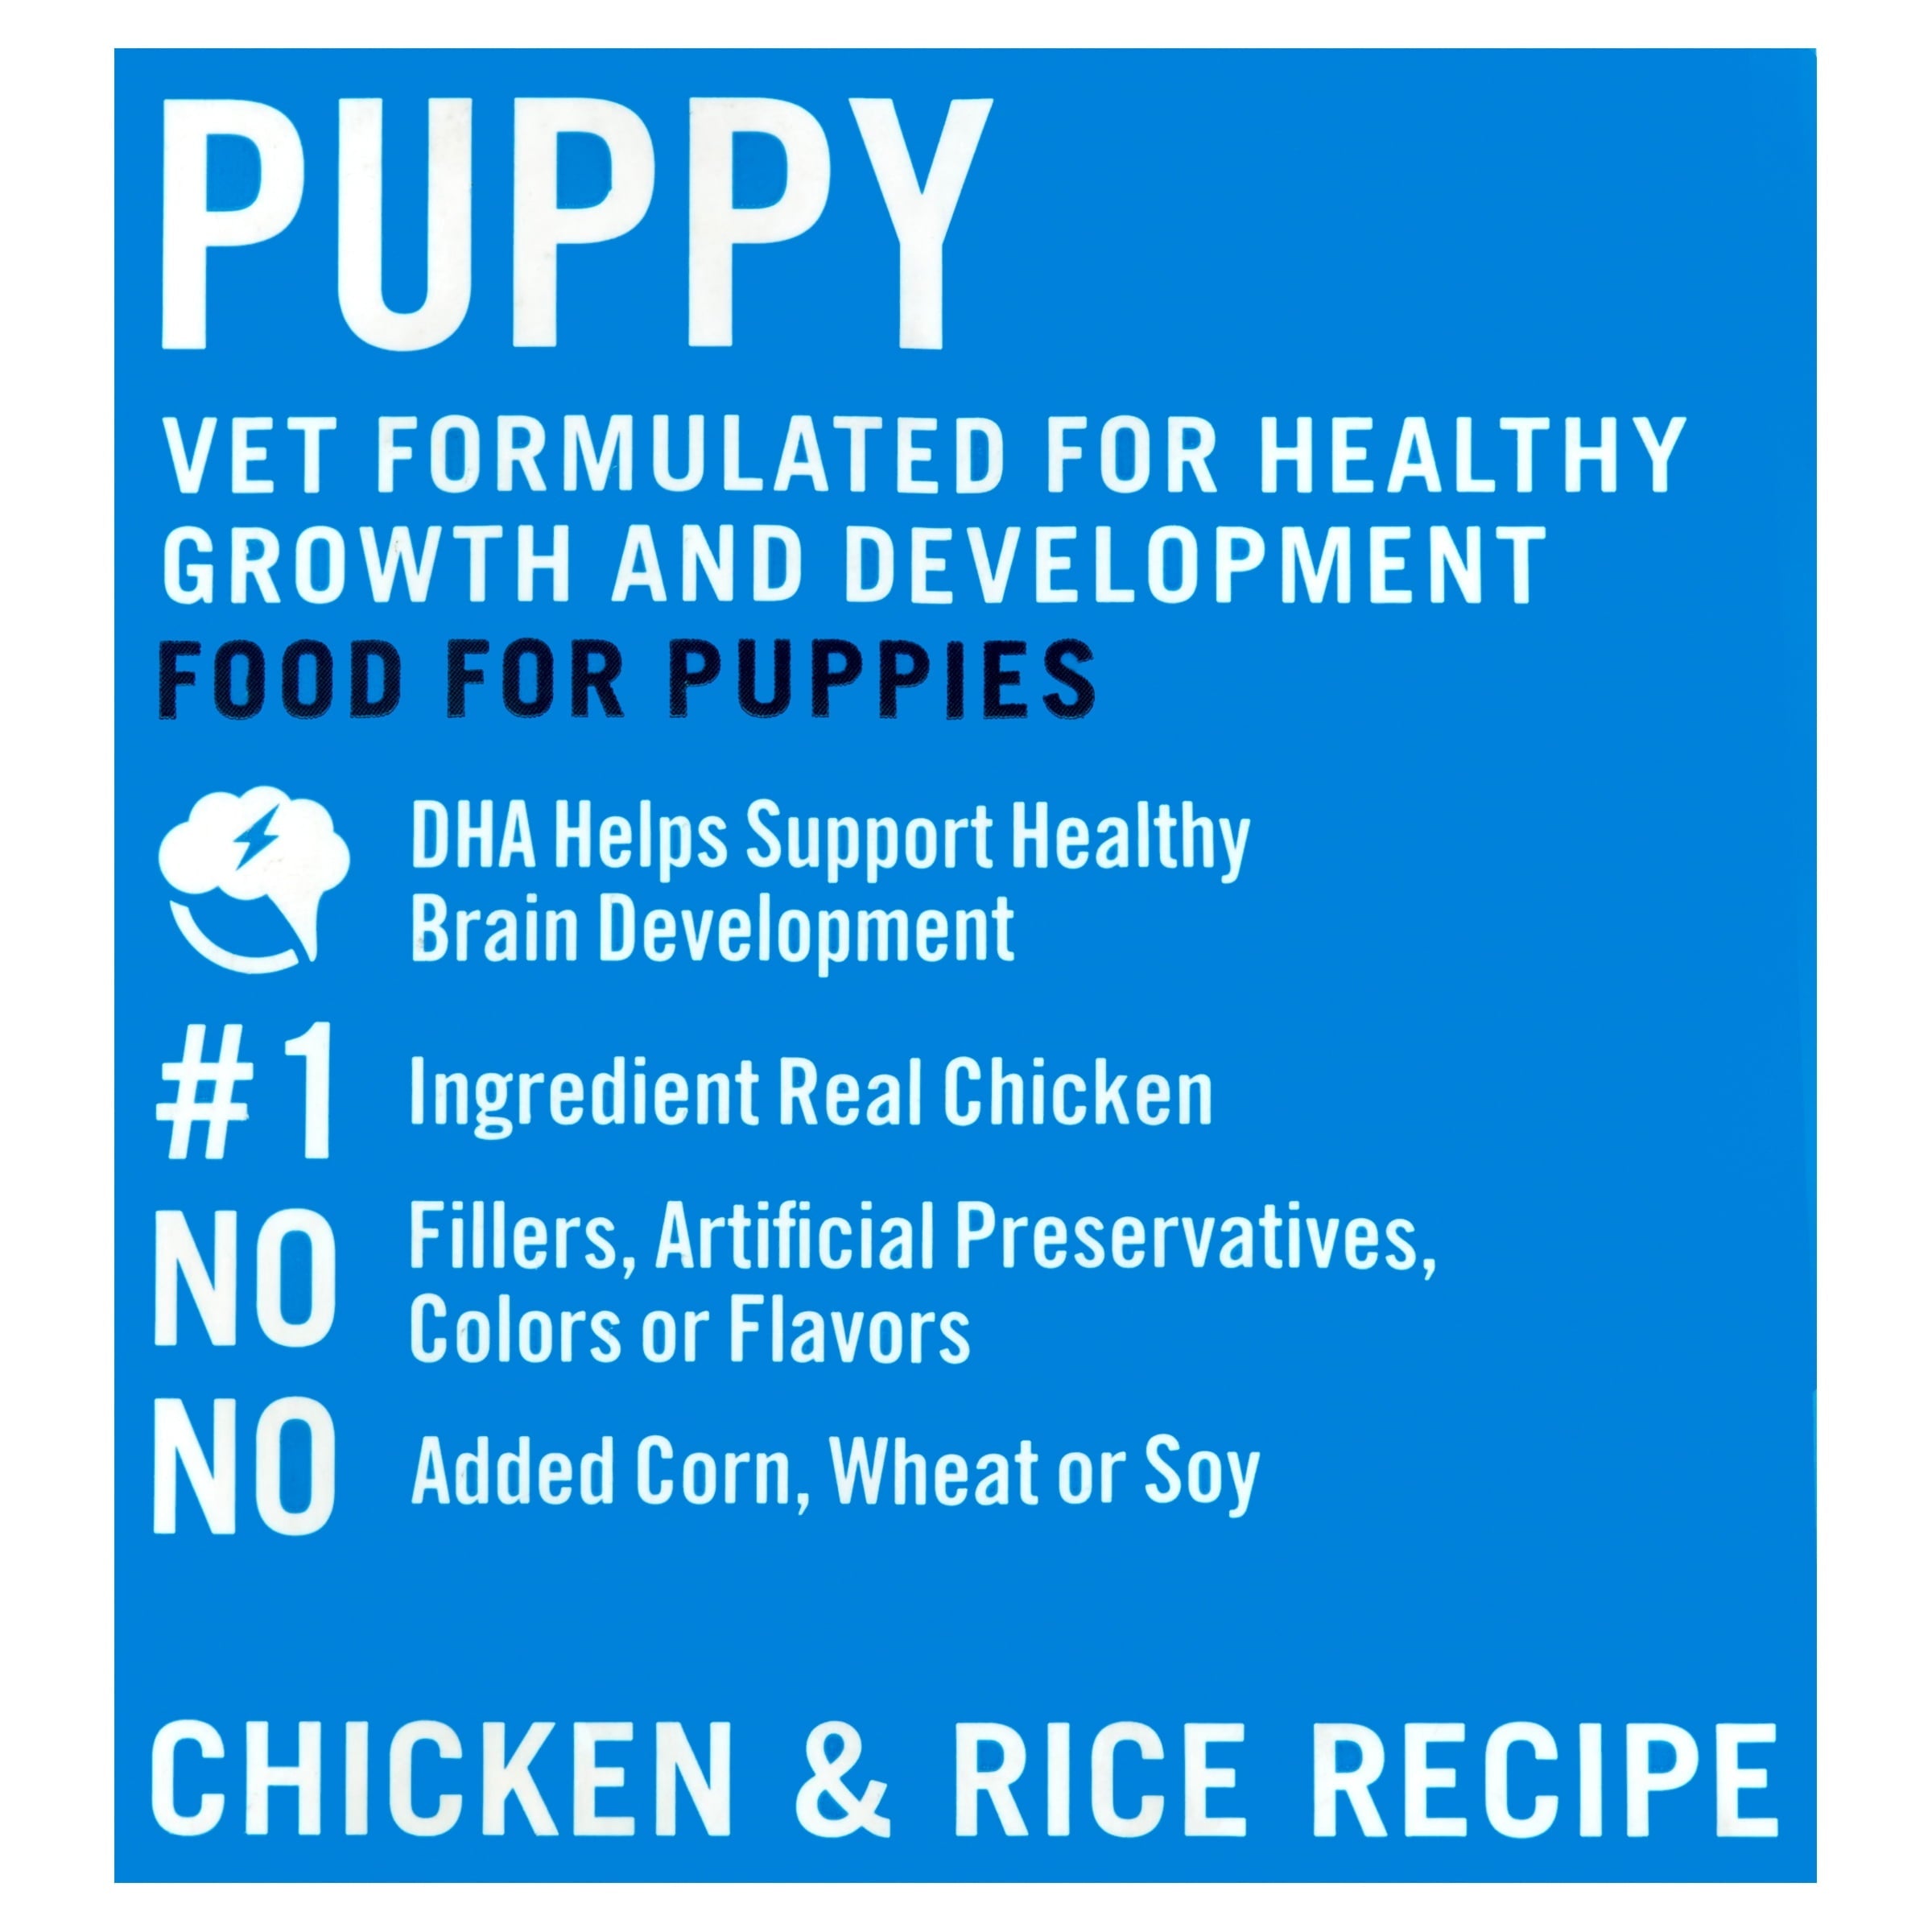 Wholesale prices with free shipping all over United States Pure Balance Pro+ Puppy Chicken & Rice Recipe Dry Dog Food for Puppies, 16 lbs - Steven Deals